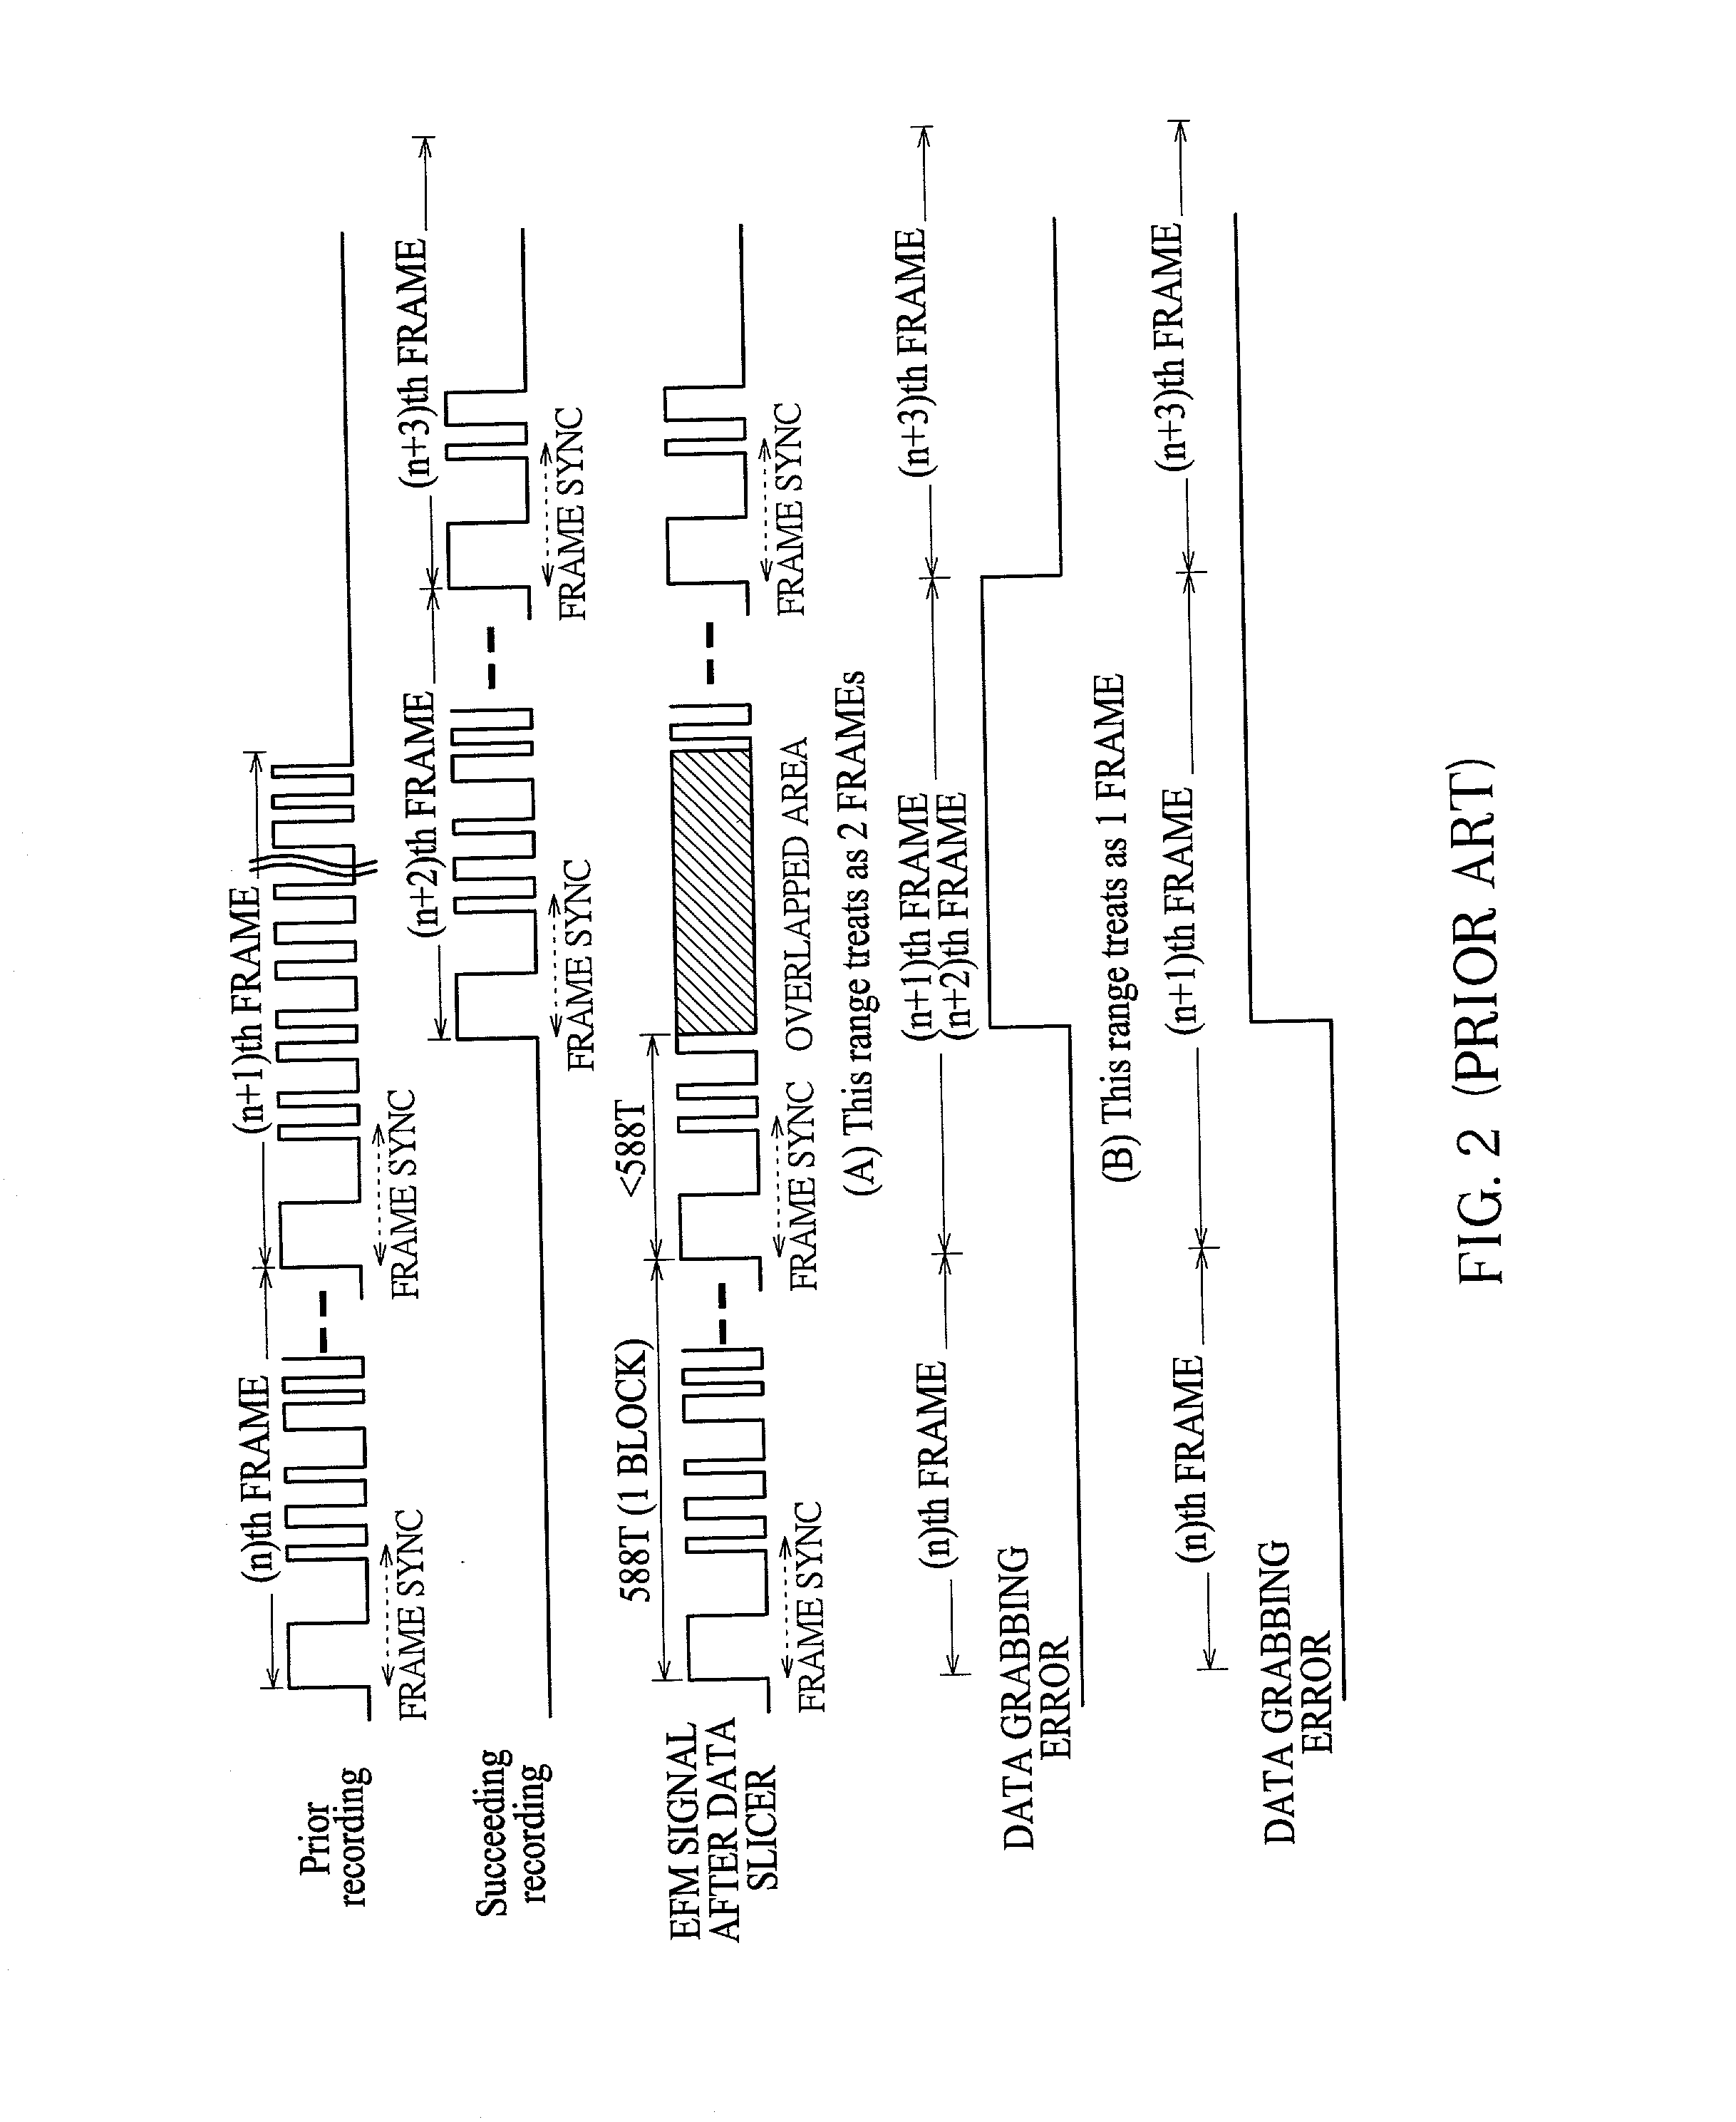 Link writing method for a recordable compact disk and driver for using the method